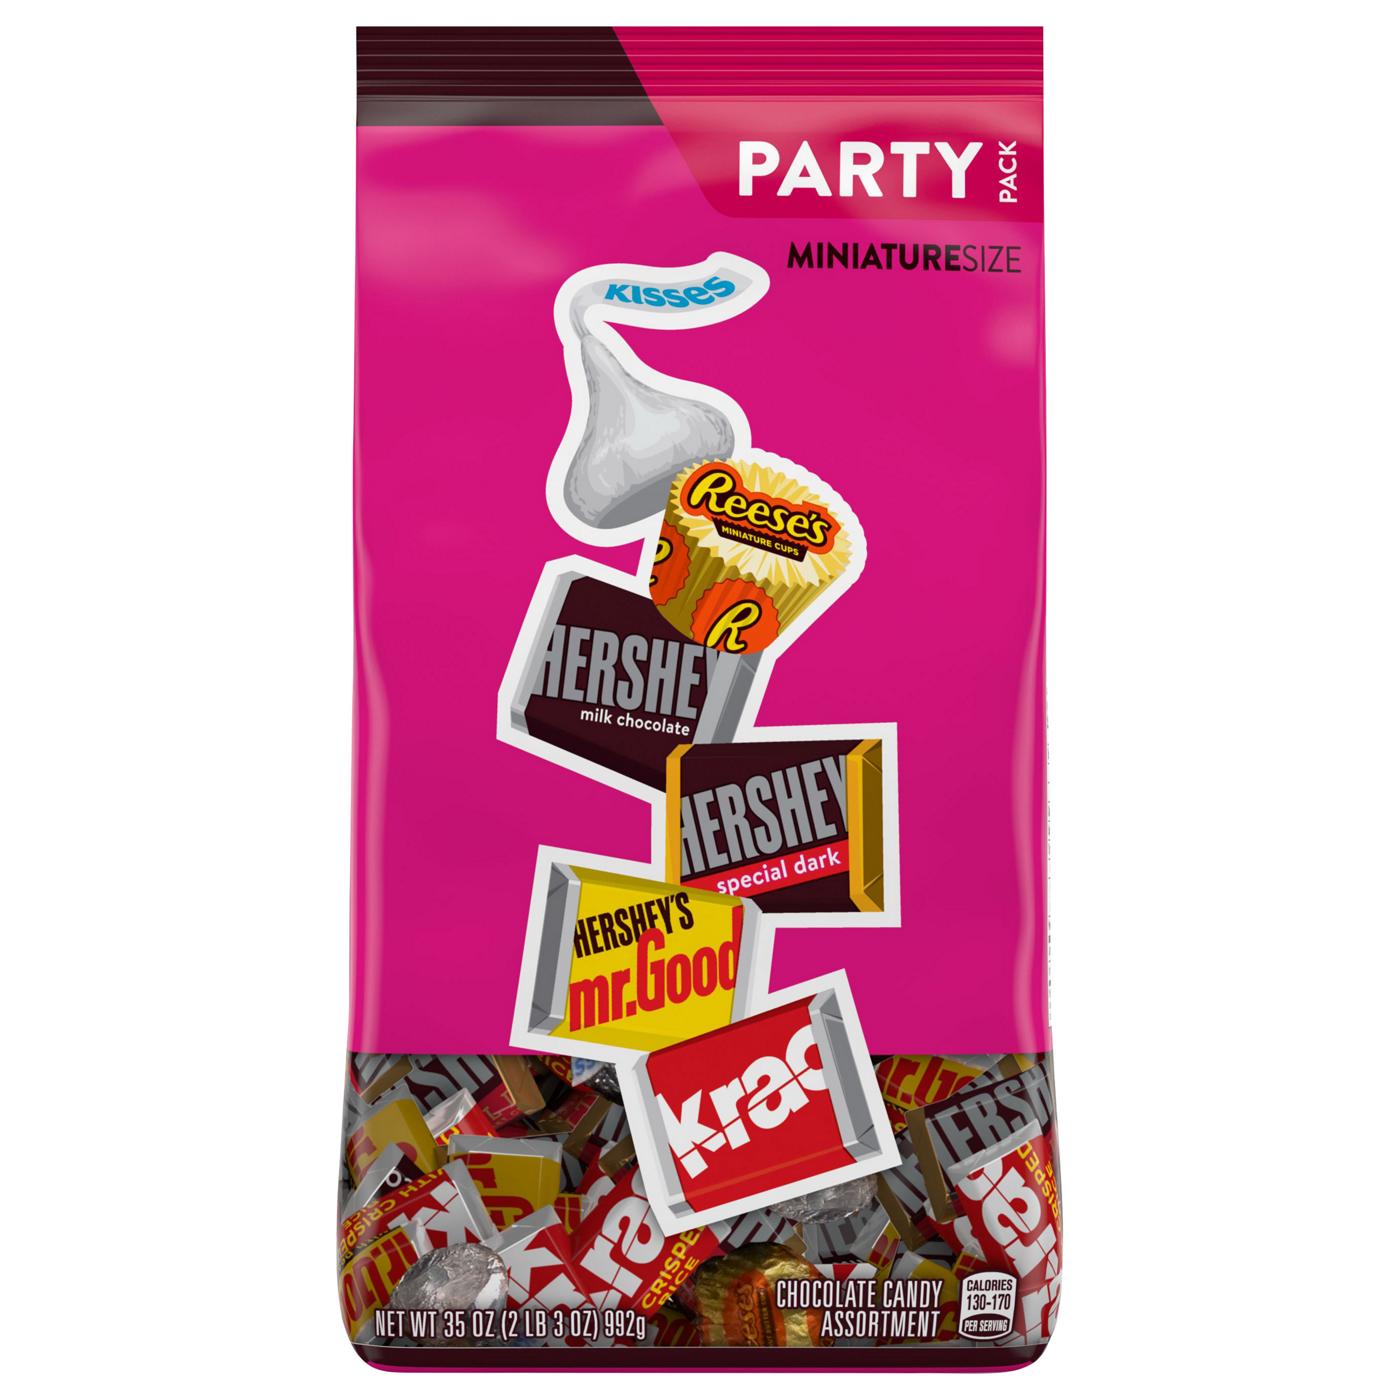 Hershey's Assorted Miniature Candy - Party Pack; image 1 of 4